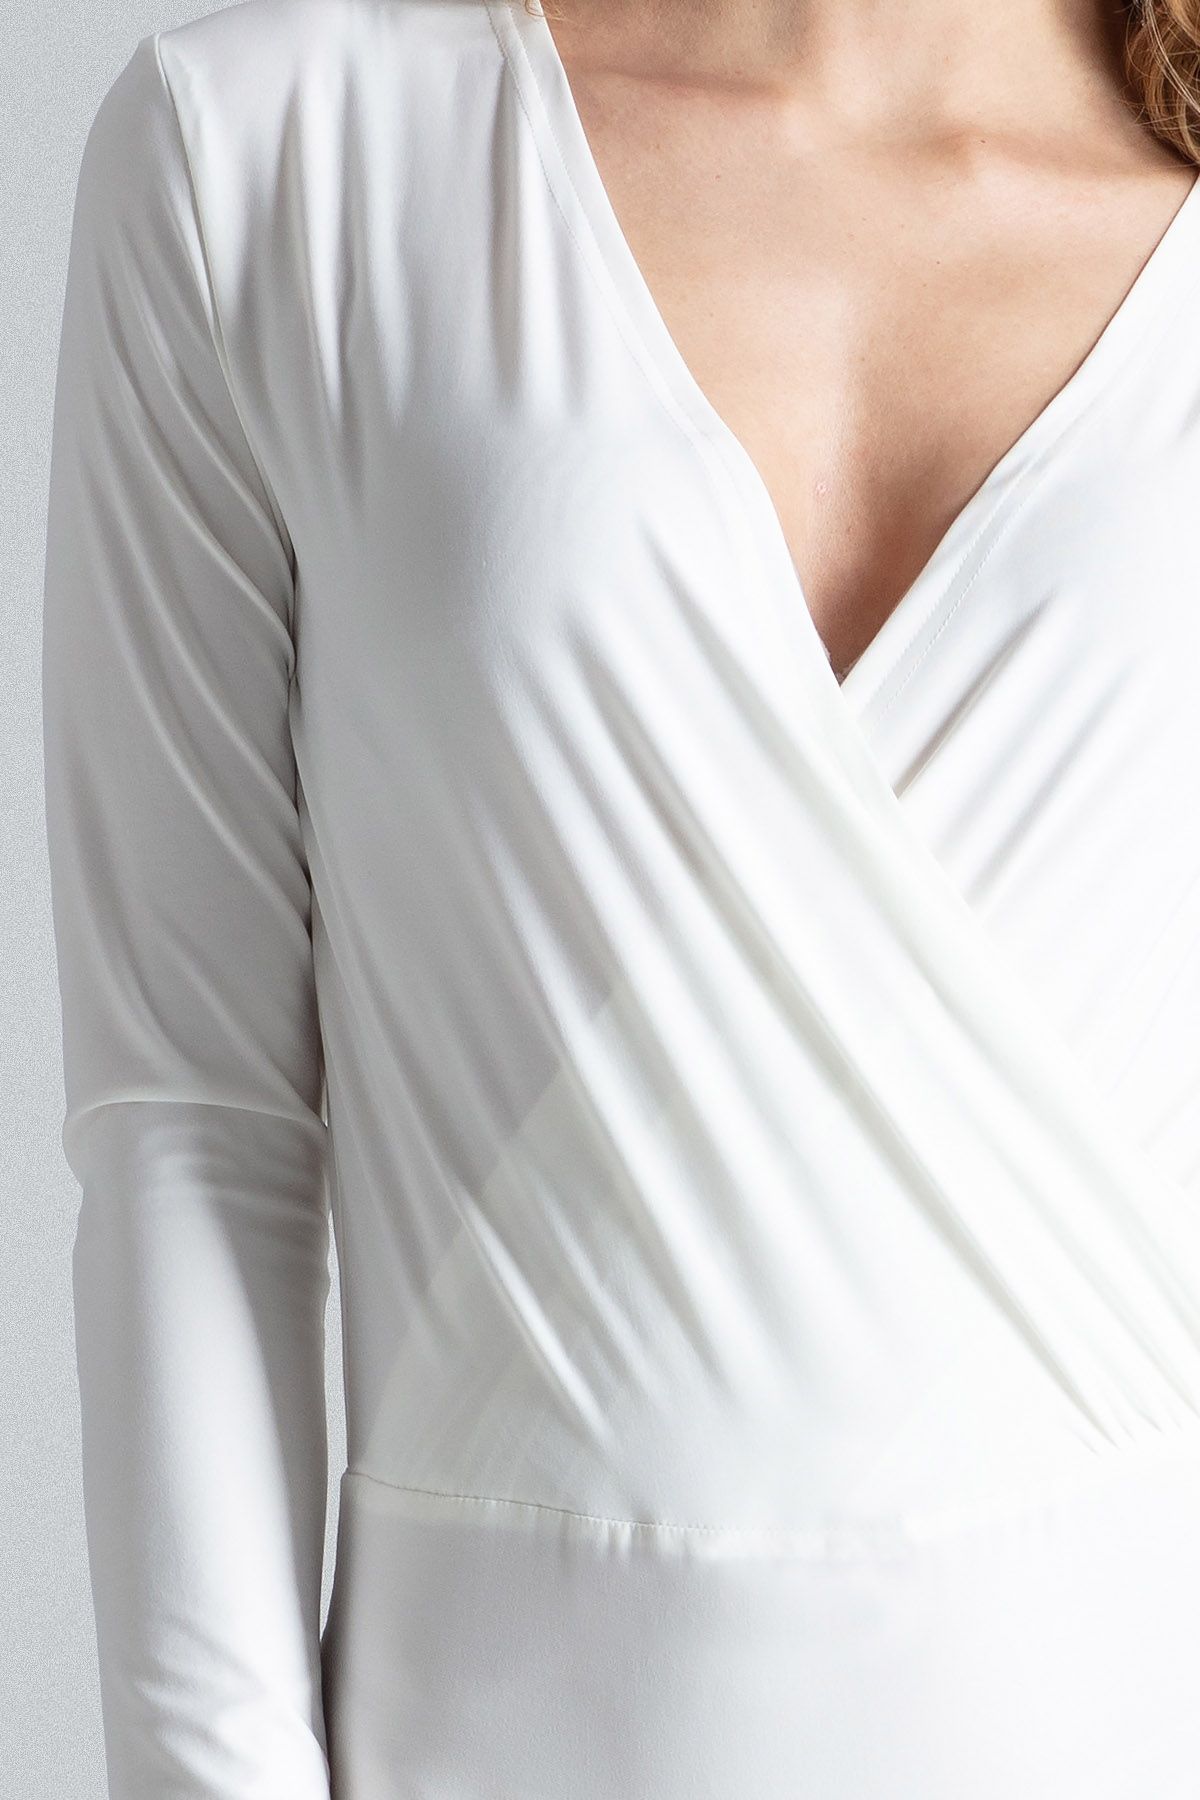 Elegant body with long sleeves, with v-neckline. Beautifully highlights the silhouette. Perfect for many styles.